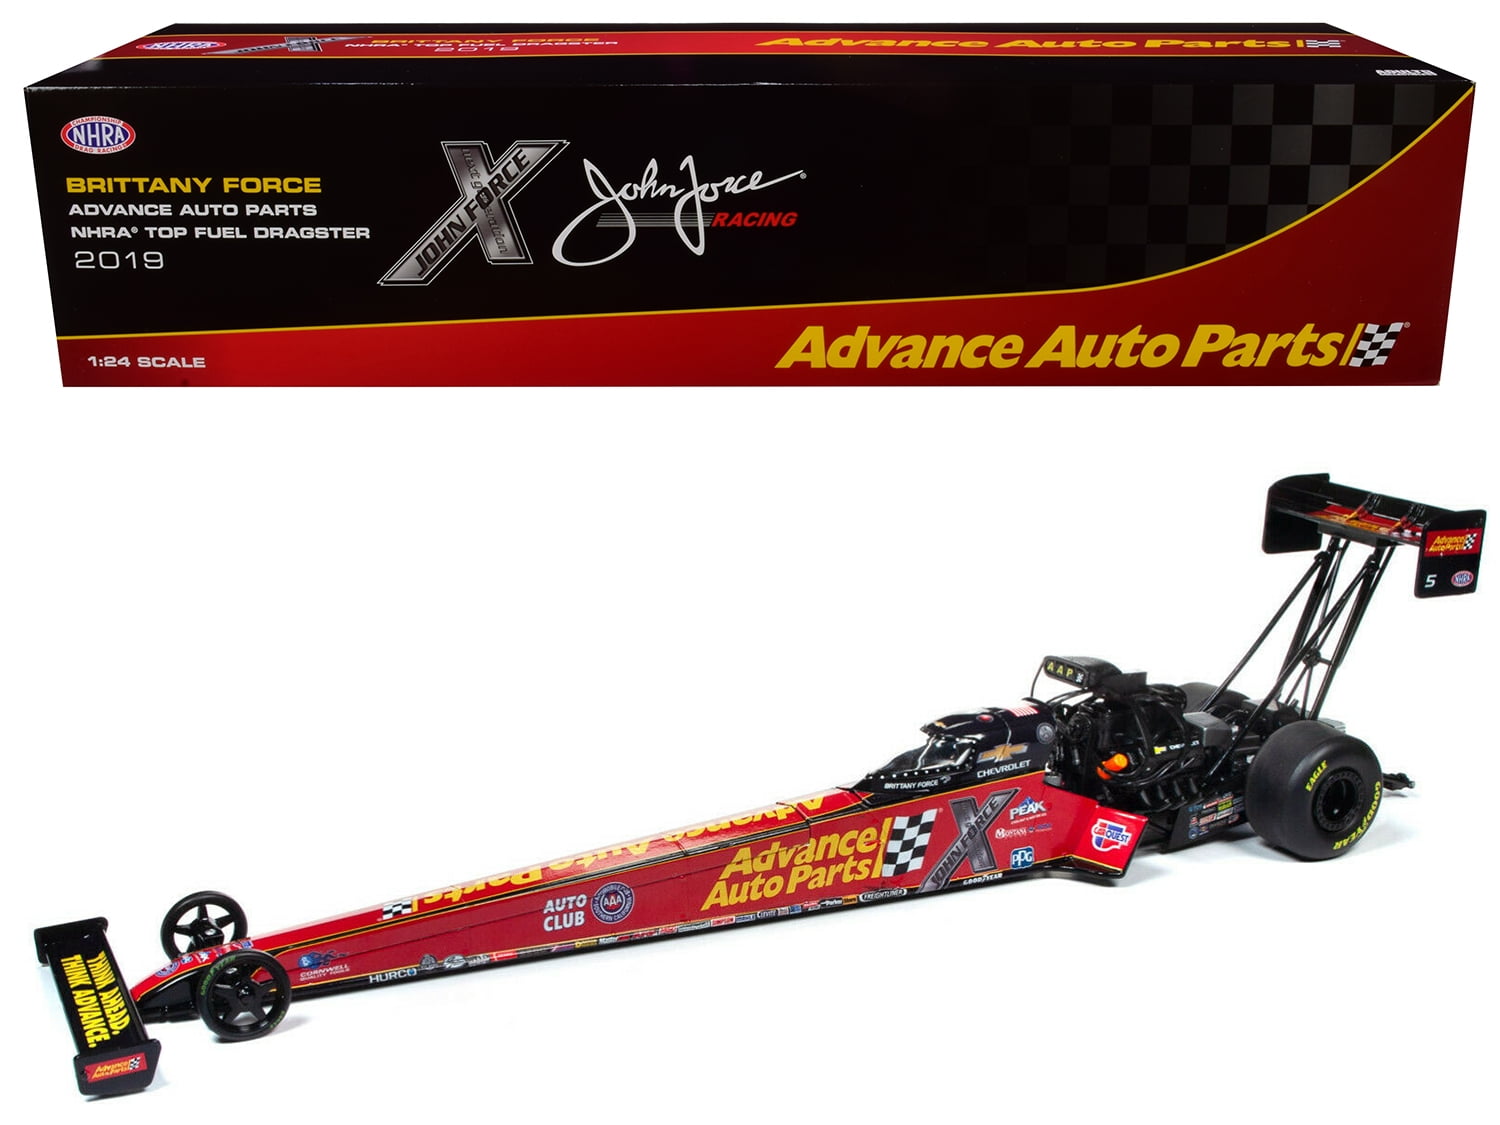 2019 Top Fuel Dragster TFD NHRA Brittany Force Advance Auto Parts 1 24 for sale online 